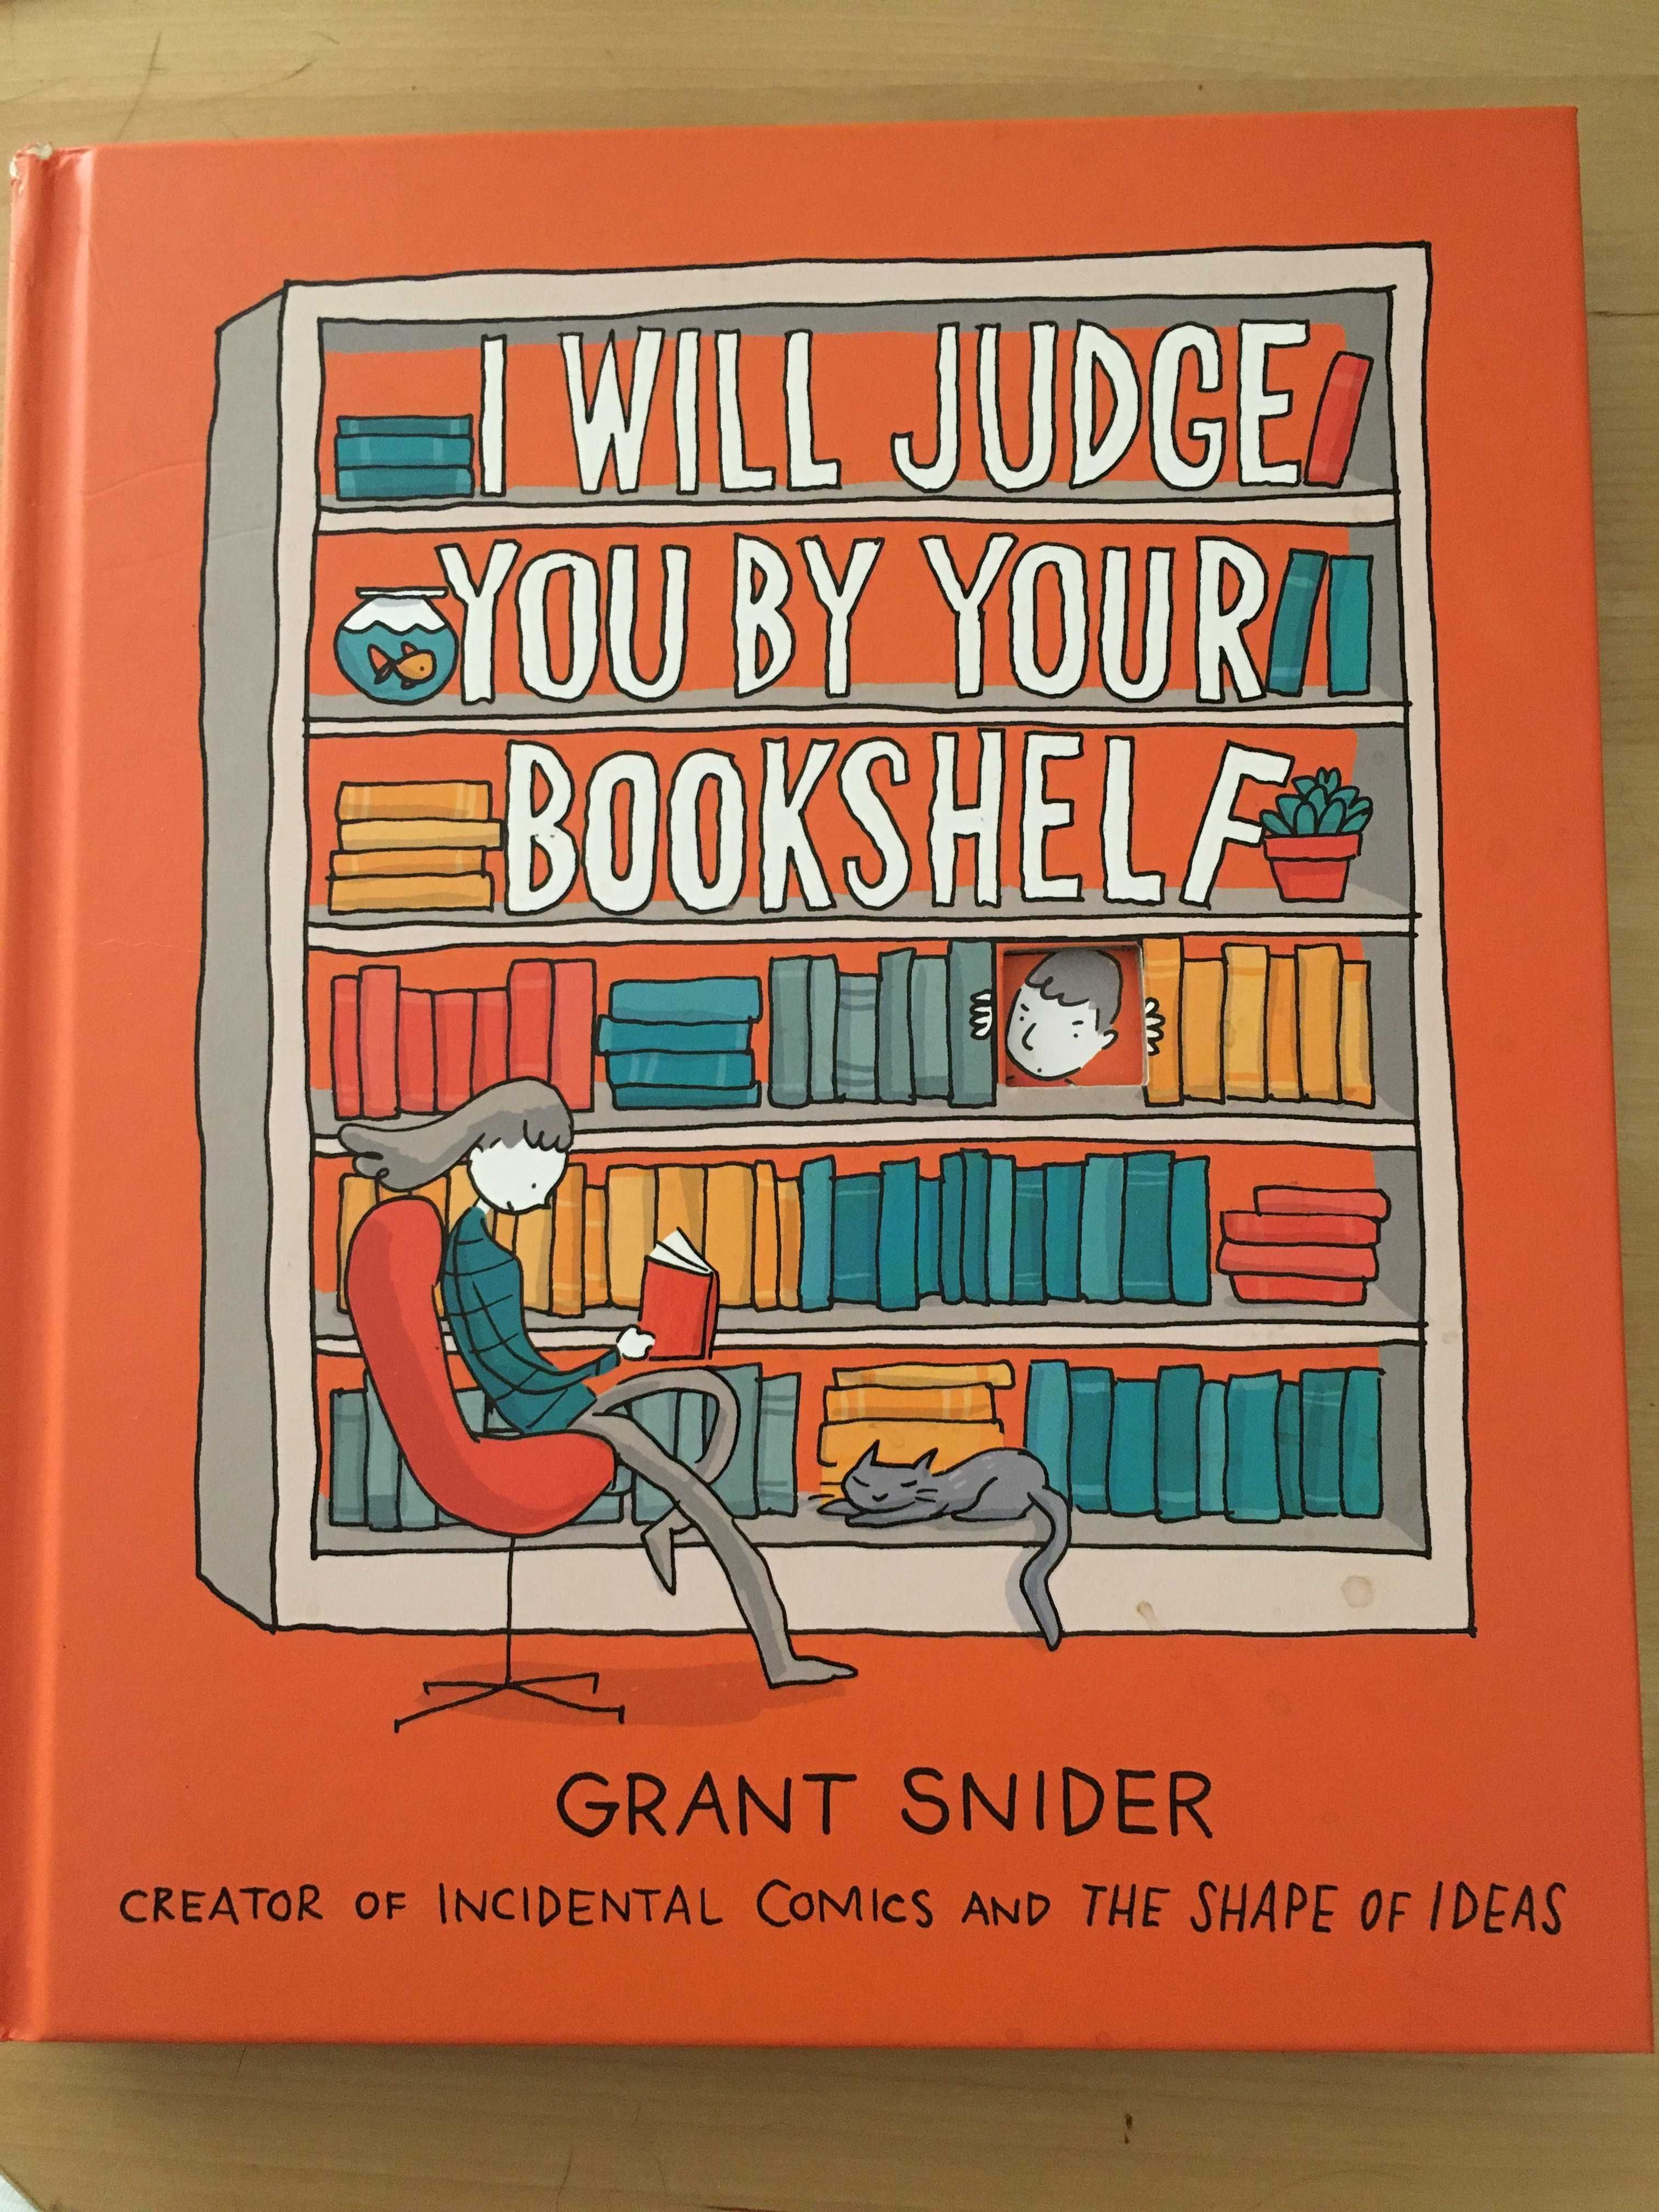 I will judge you by your bookshelf